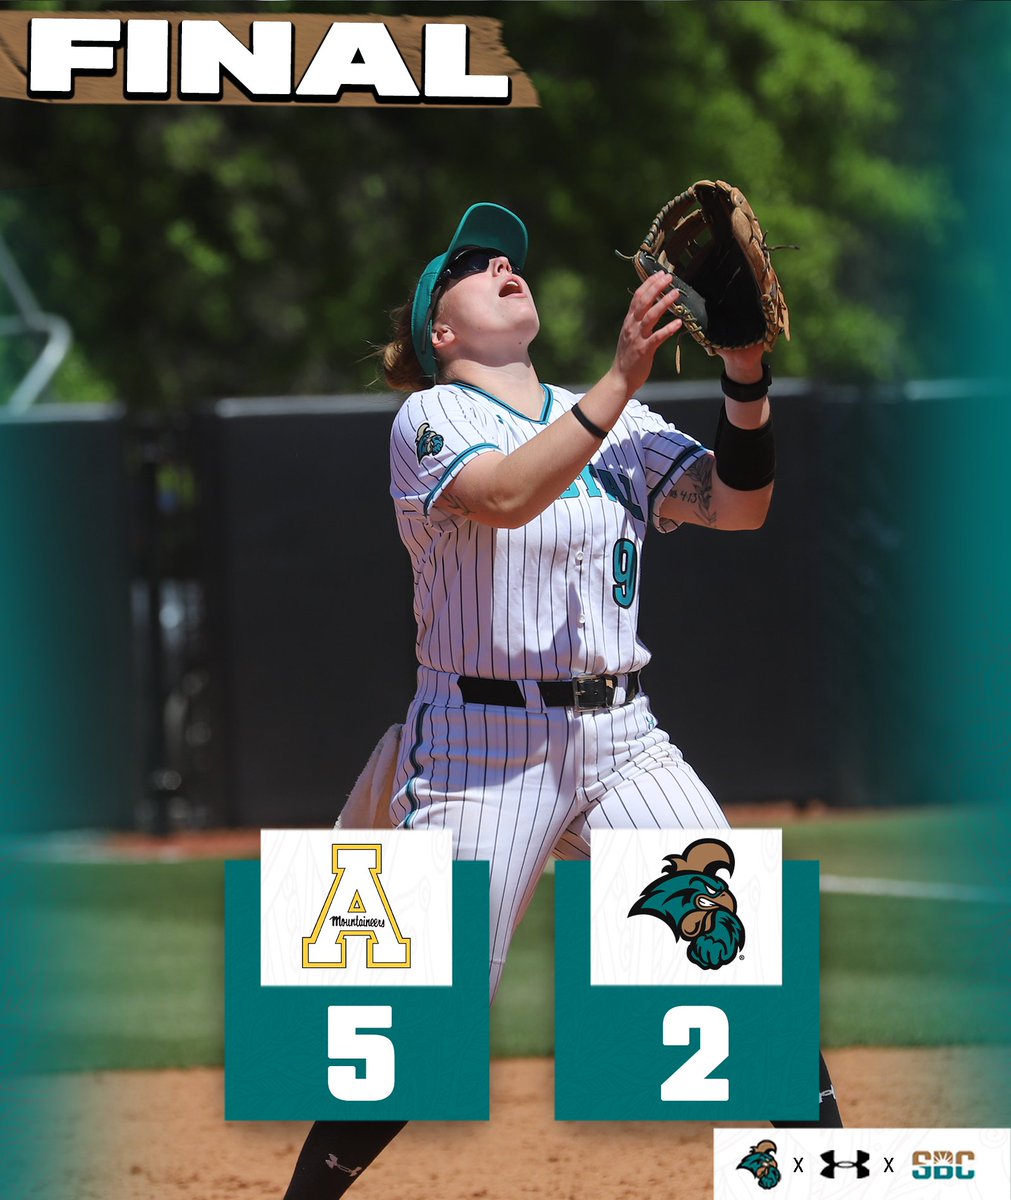 We'll be back in action tomorrow at 2 P.M. for game two of the series. #TEALNATION #ChantsUp